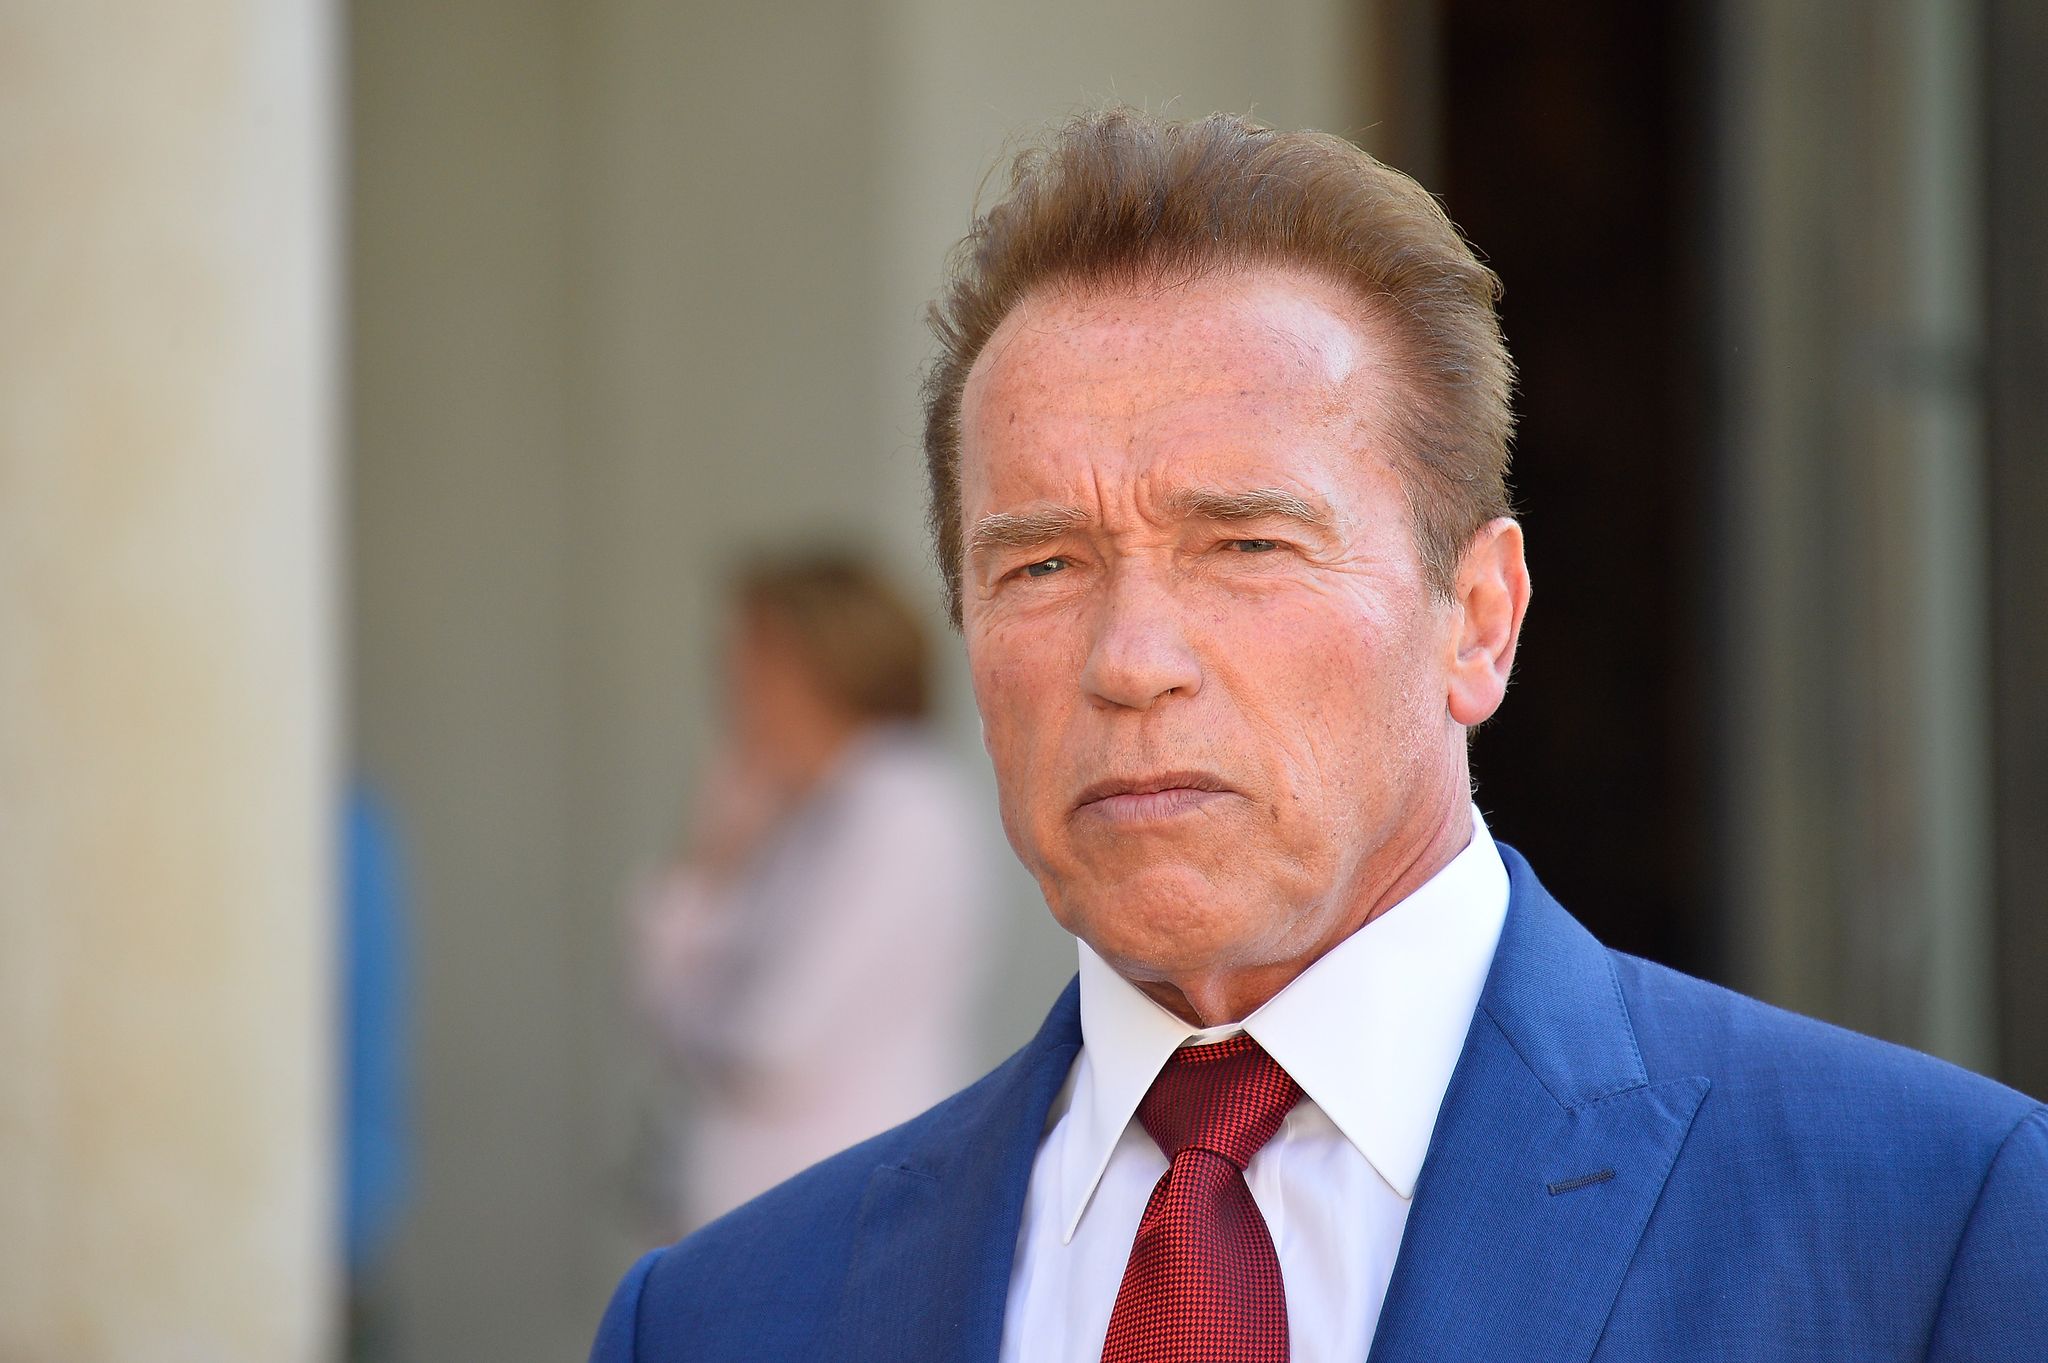 Arnold Schwarzenegger addresses the press as he leaves after meeting French President Emmanuel Macron at the Elysee Palace on June 23, 2017 | Photo: Getty Images